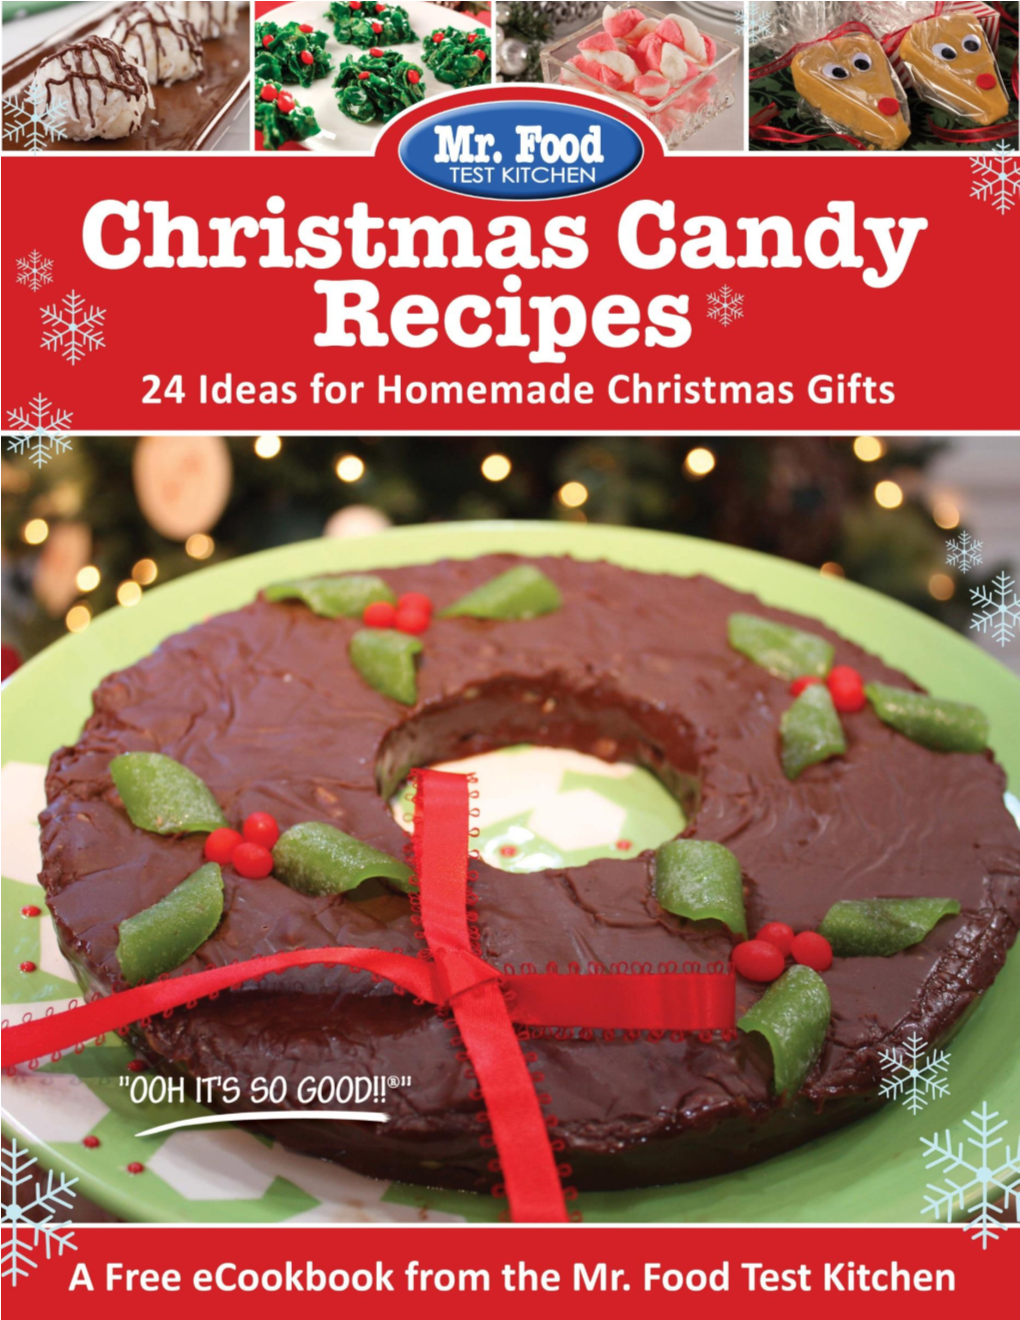 Download Your Free Copy of Christmas Candy Recipes